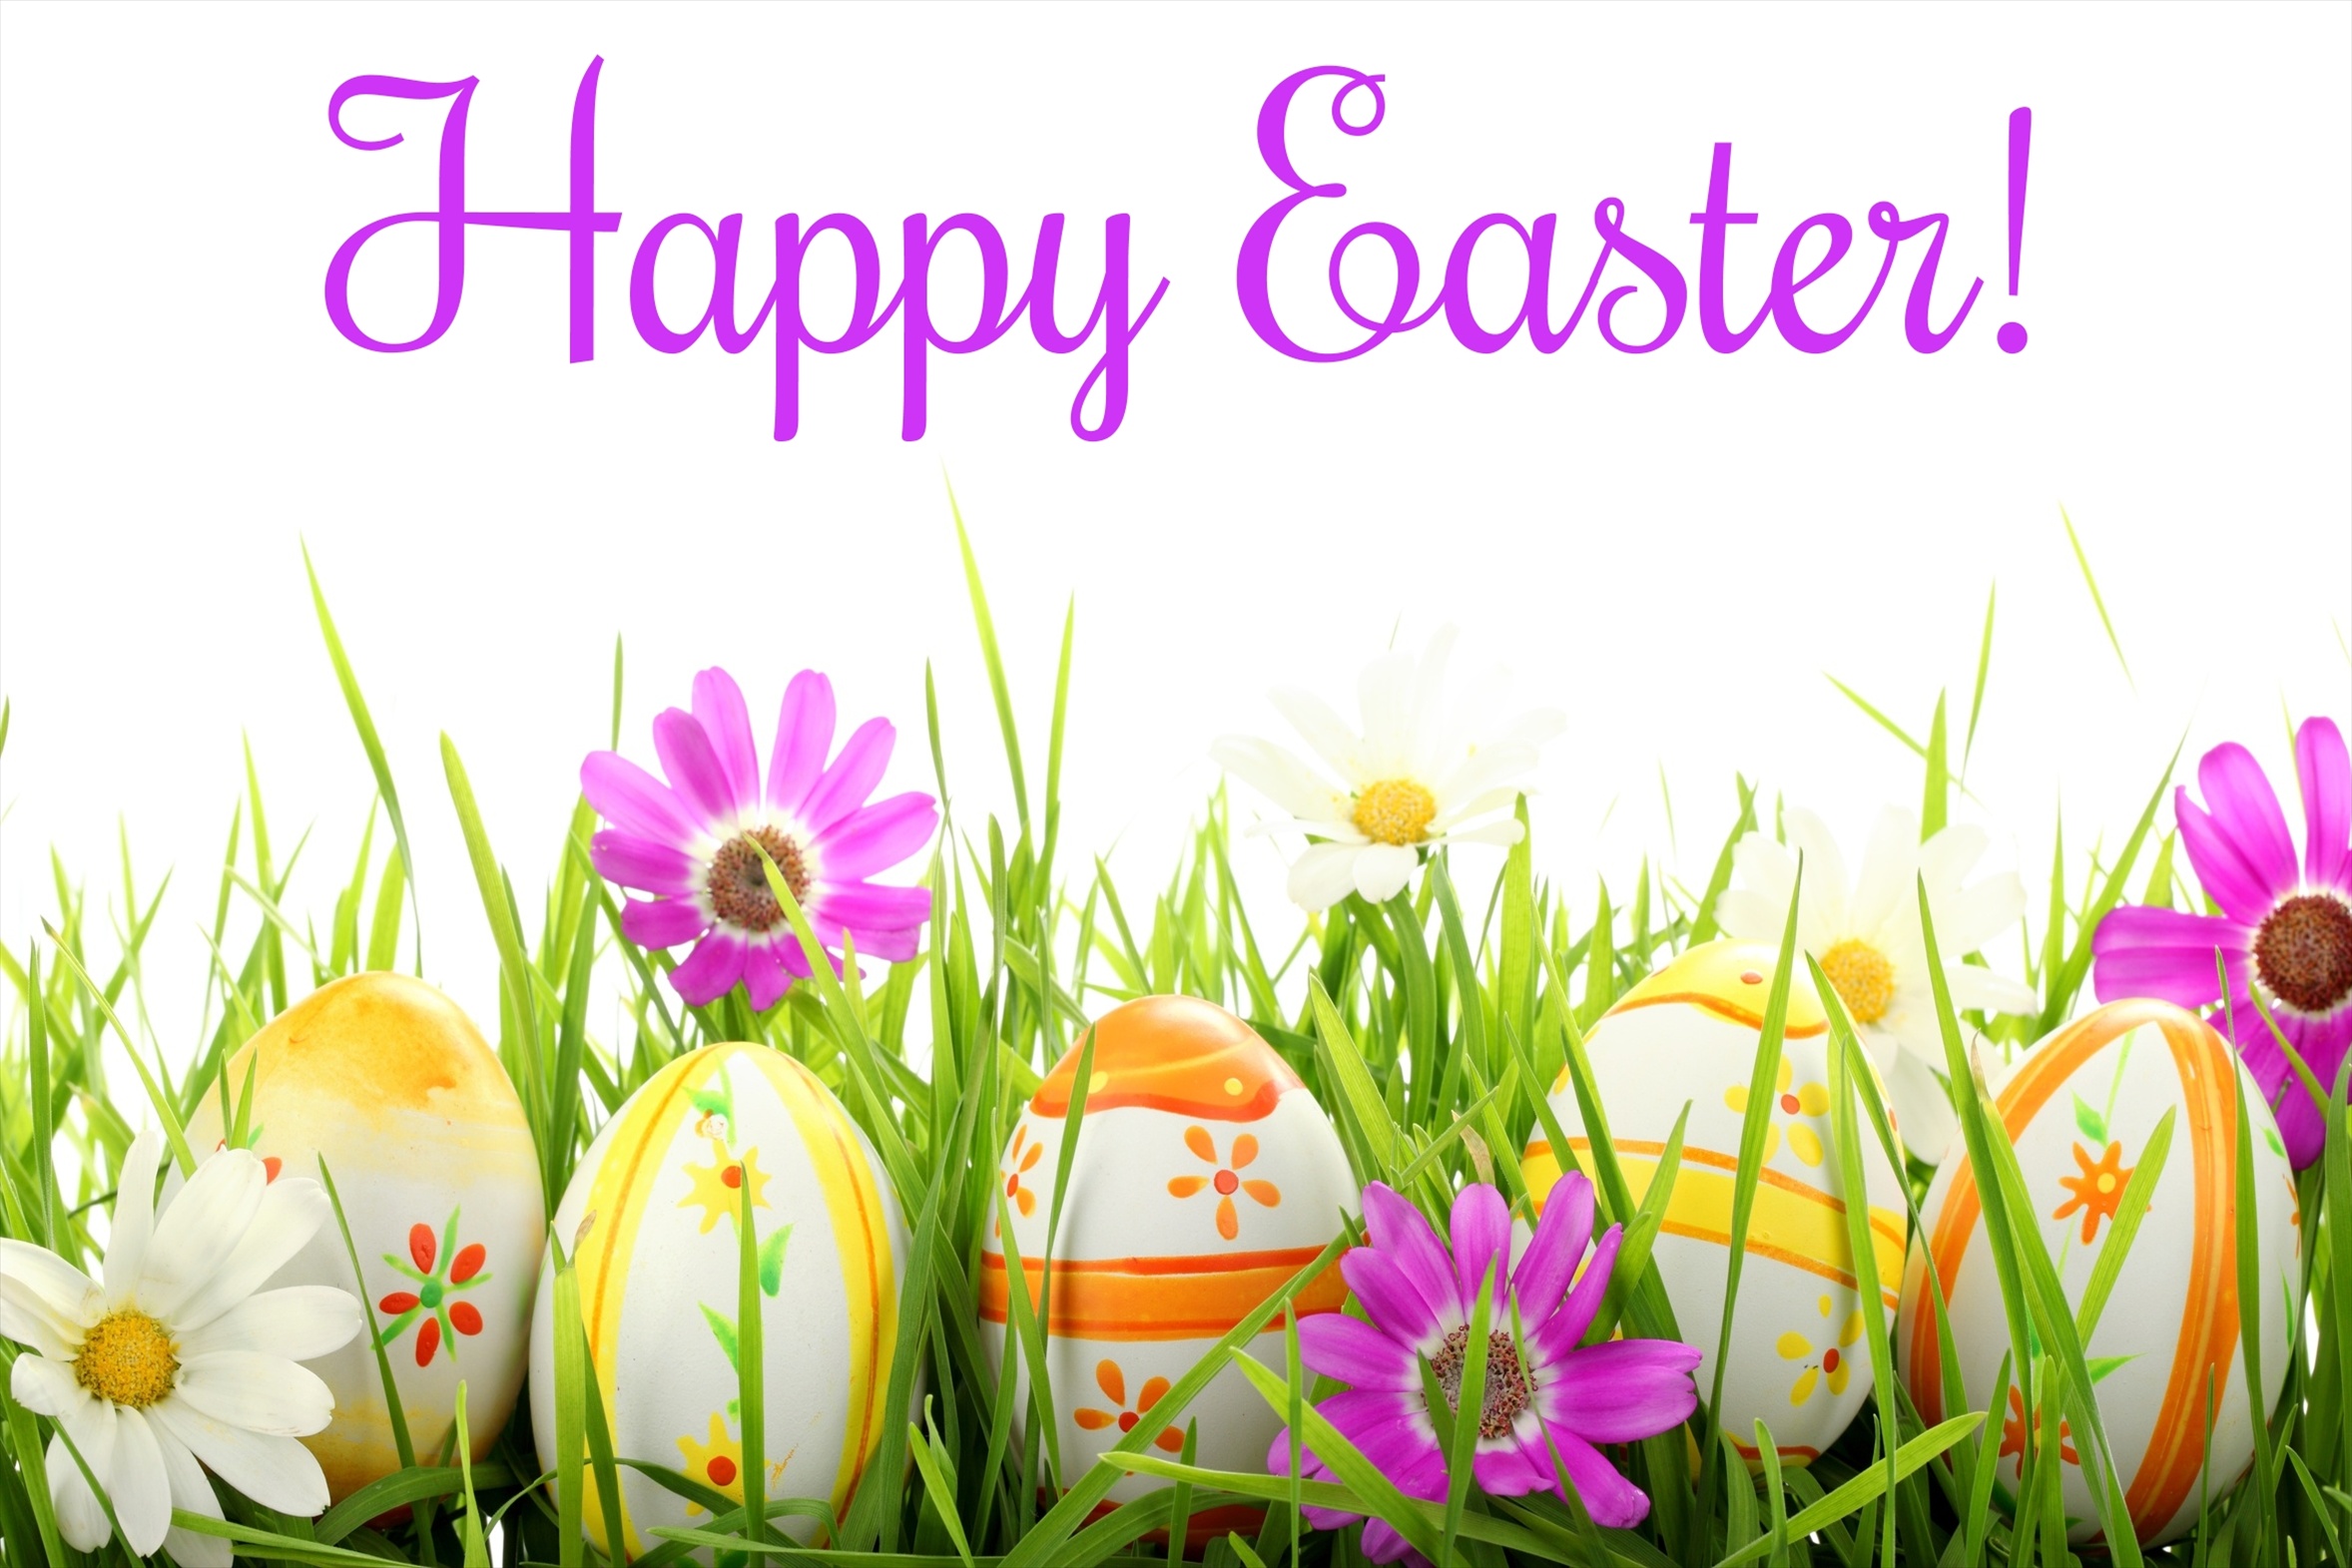 Happy Easter Images for Desktop collection (45+)